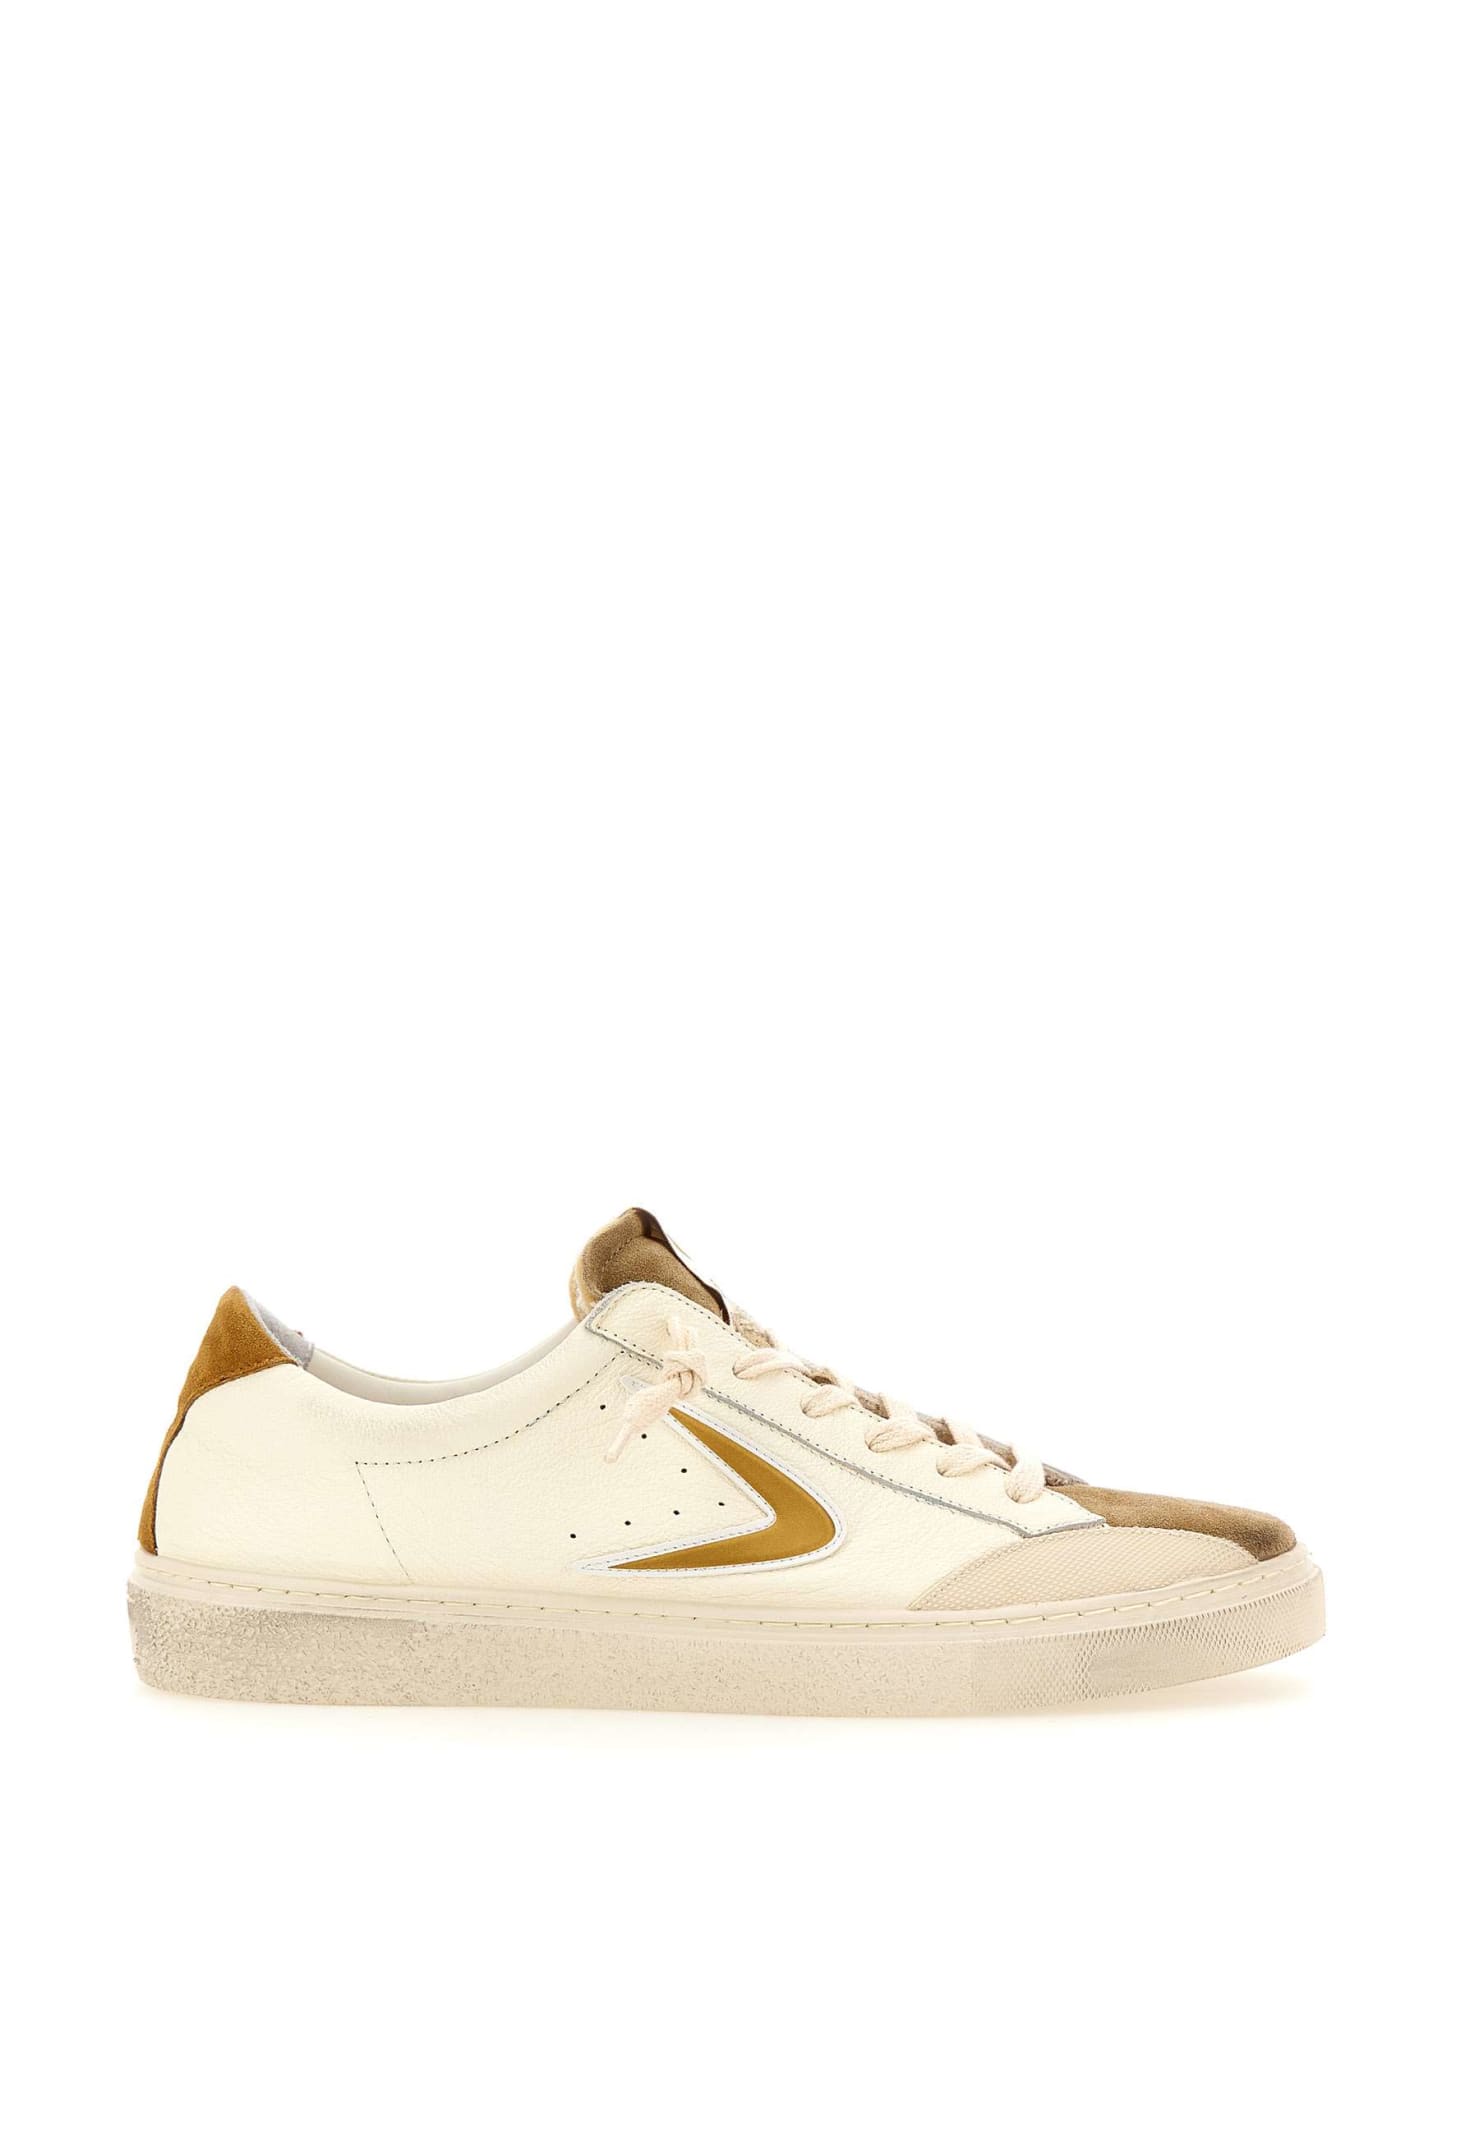 Valsport Ollieregular&goofy Leather Trainers In Bianco Oro